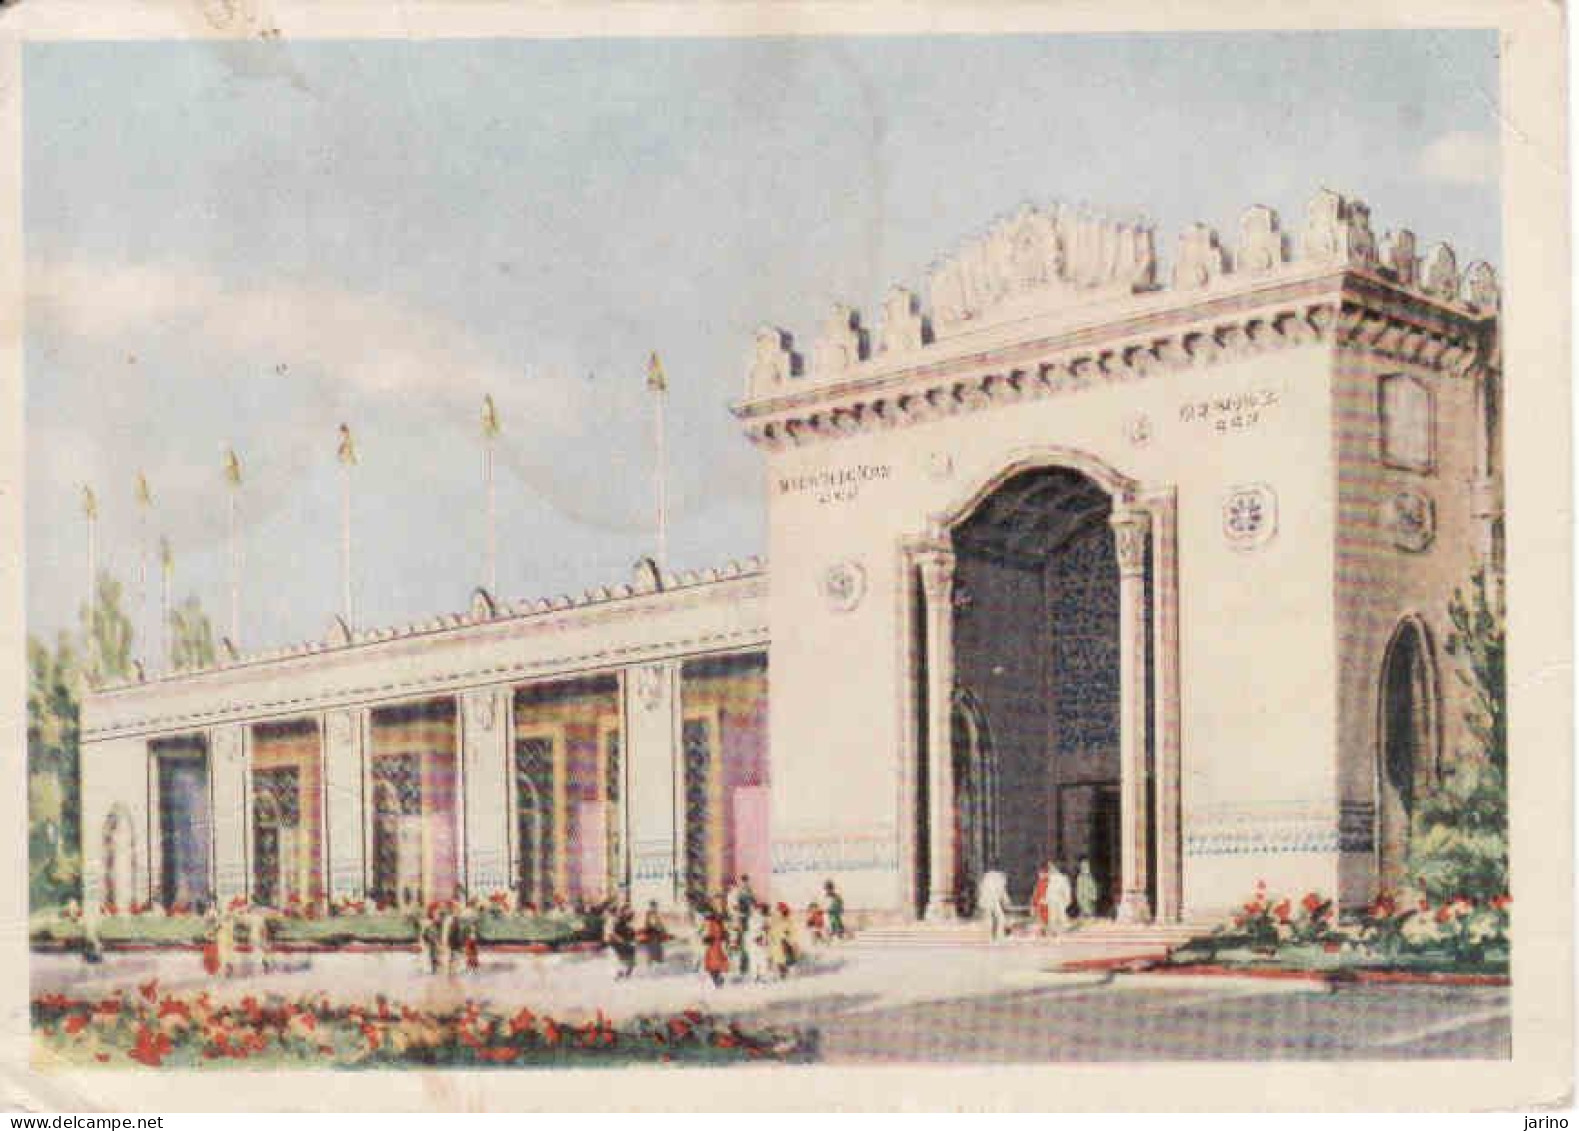 Kyrgyzstan, Pavilion Of The Kyrgyz Republic On Agricultural Exhibition, Unused 1954 - Kirghizistan